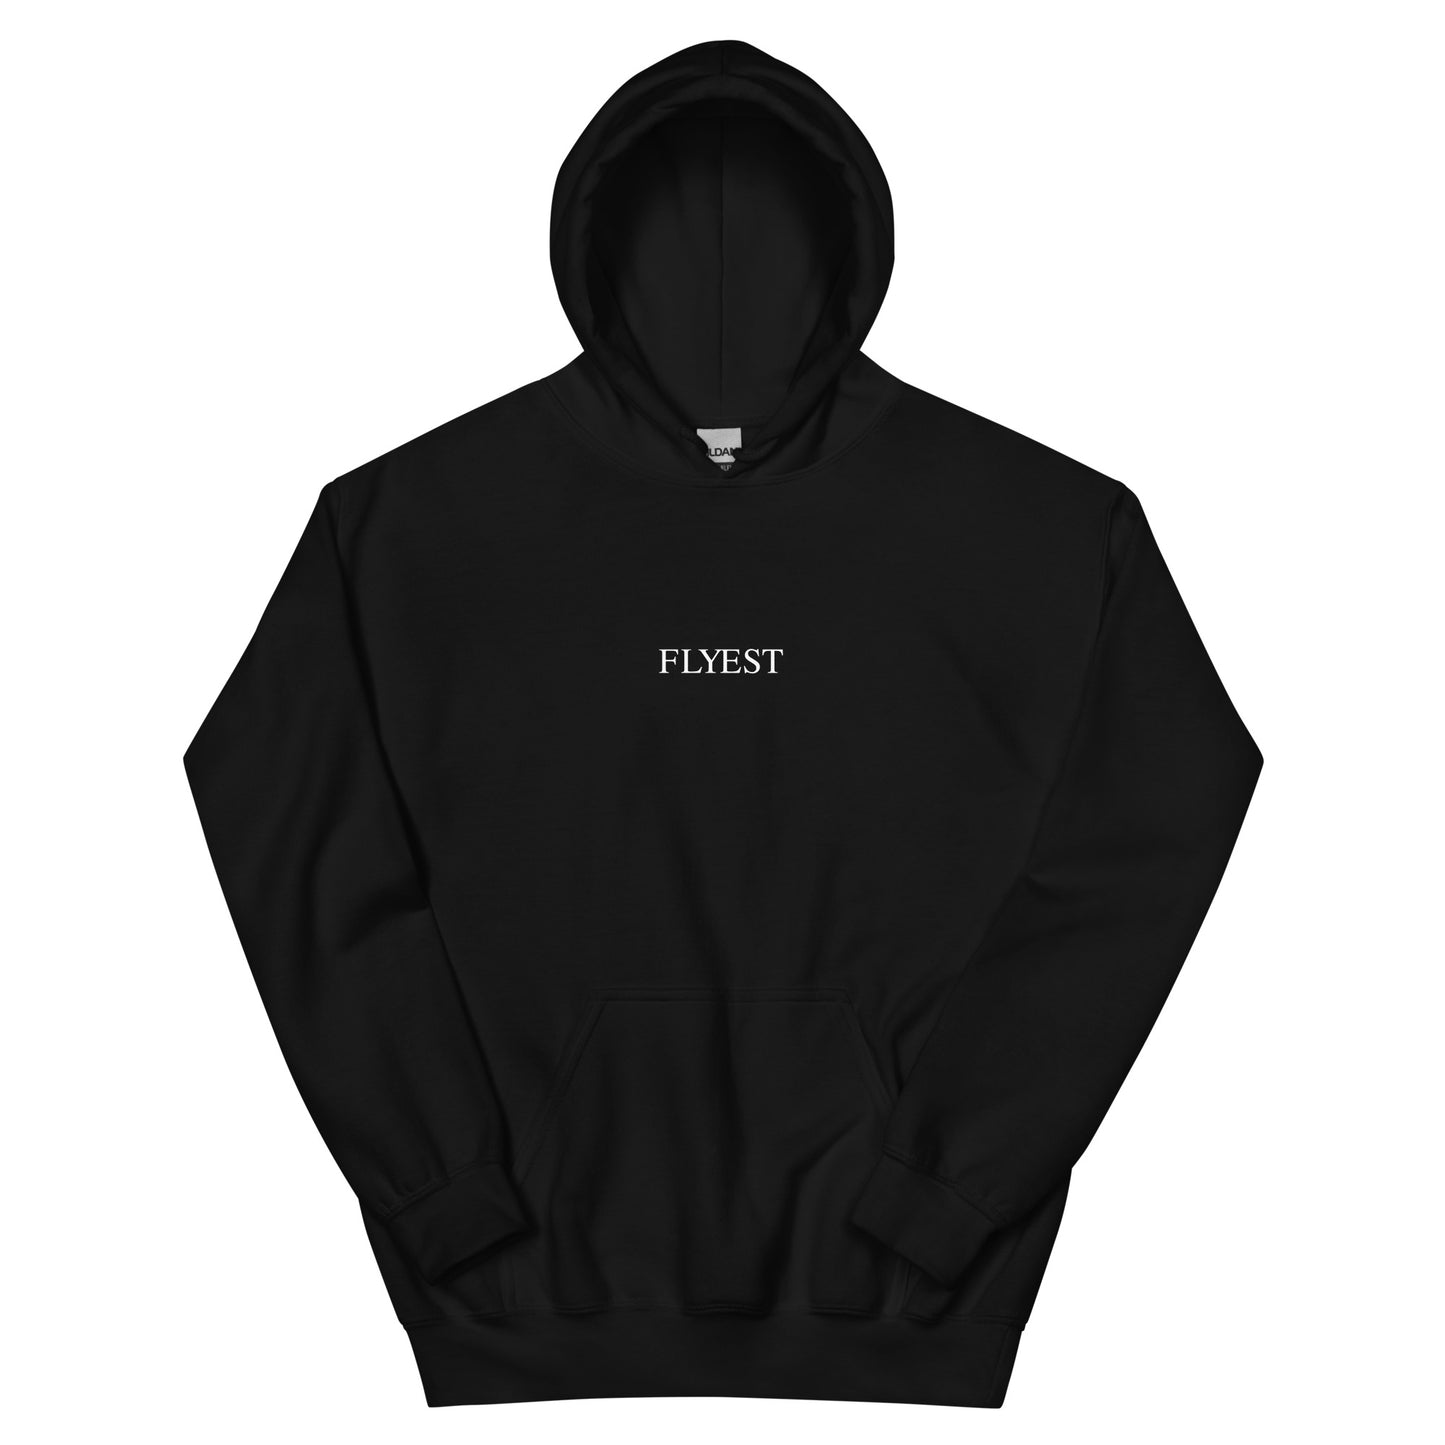 Flyest Large but Unseen hoodie